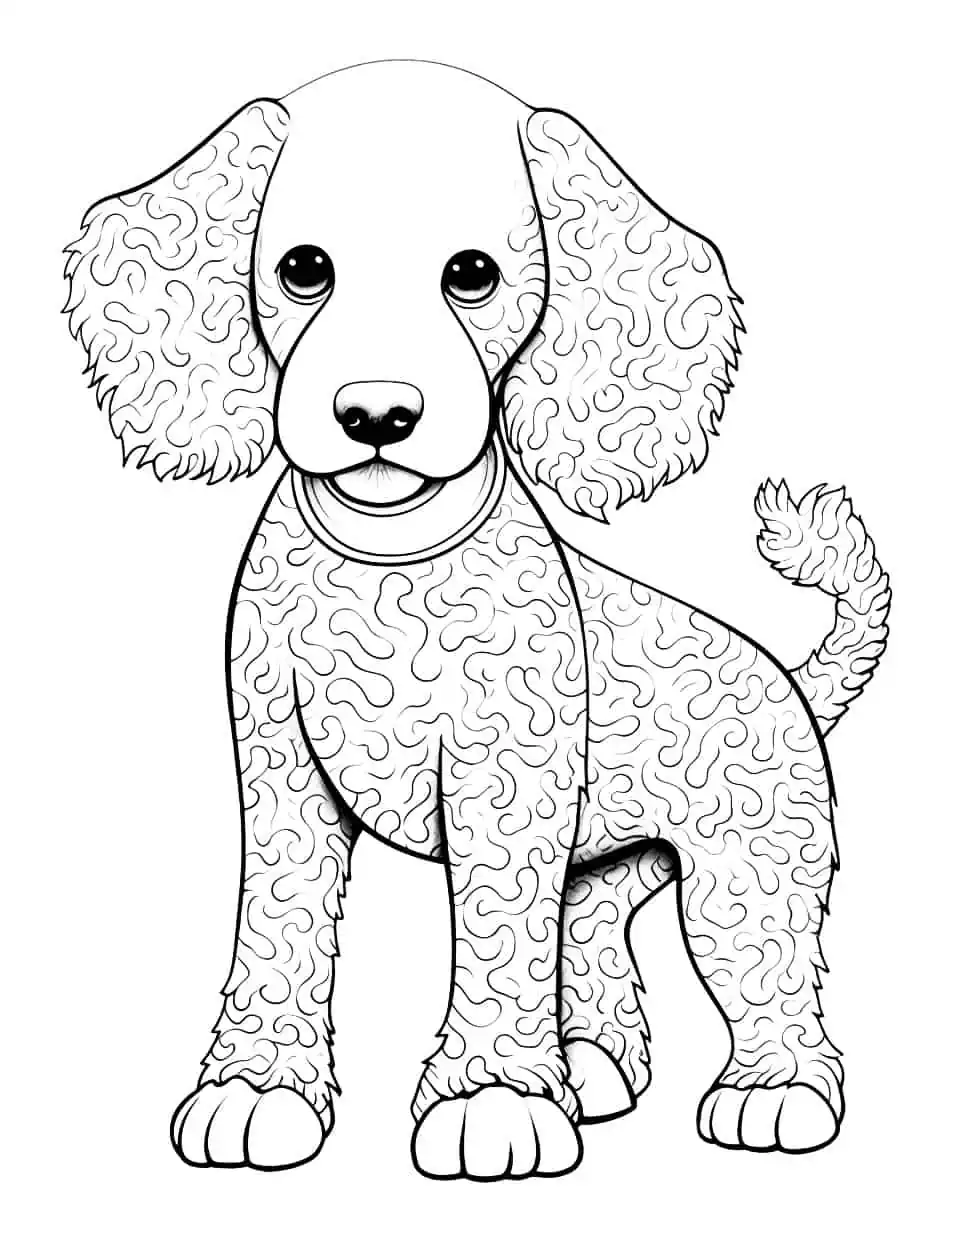 Full Page Poodle Drawing Coloring Page - A full-page, intricate Poodle drawing for an advanced coloring page.